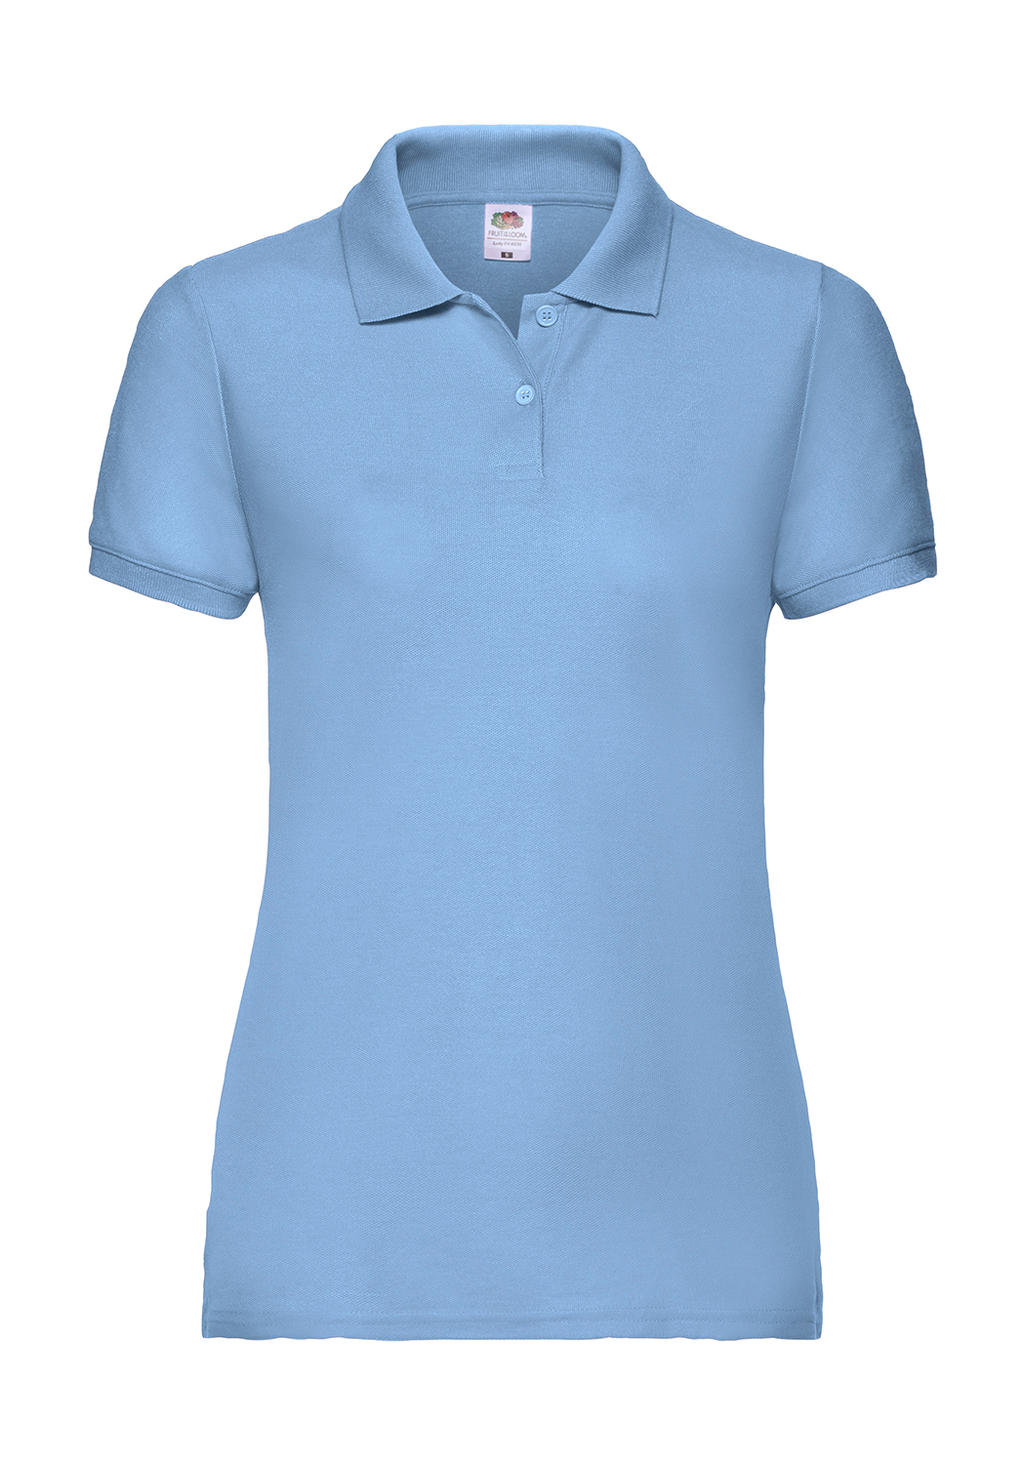  Ladies 65/35 Polo in Farbe Sky Blue